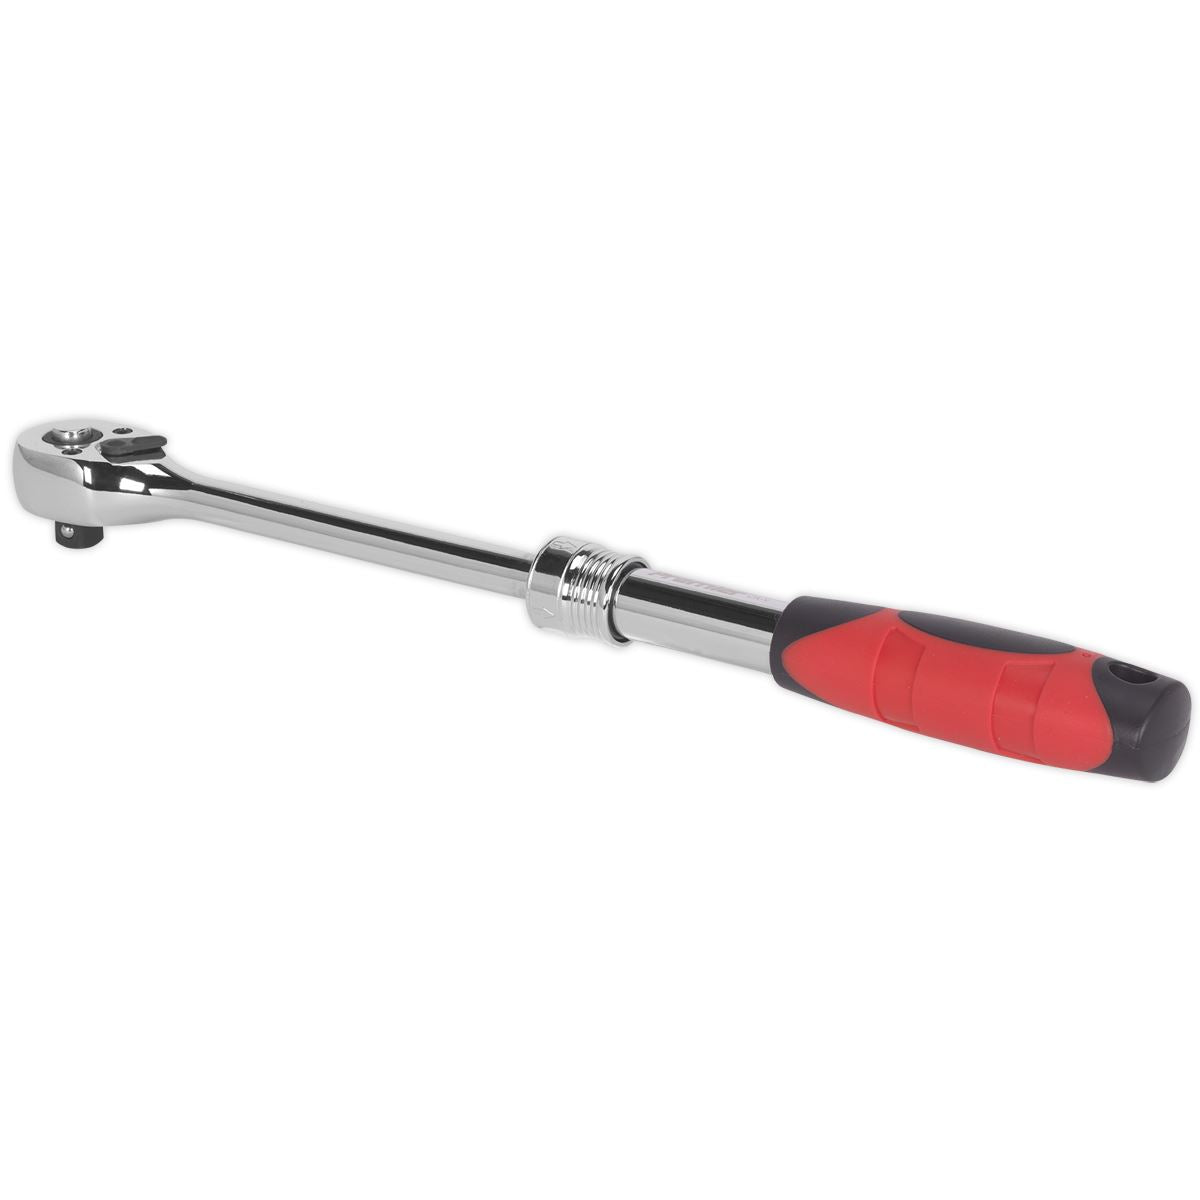 Sealey Premier Ratchet Wrench 3/8"Sq Drive Extendable